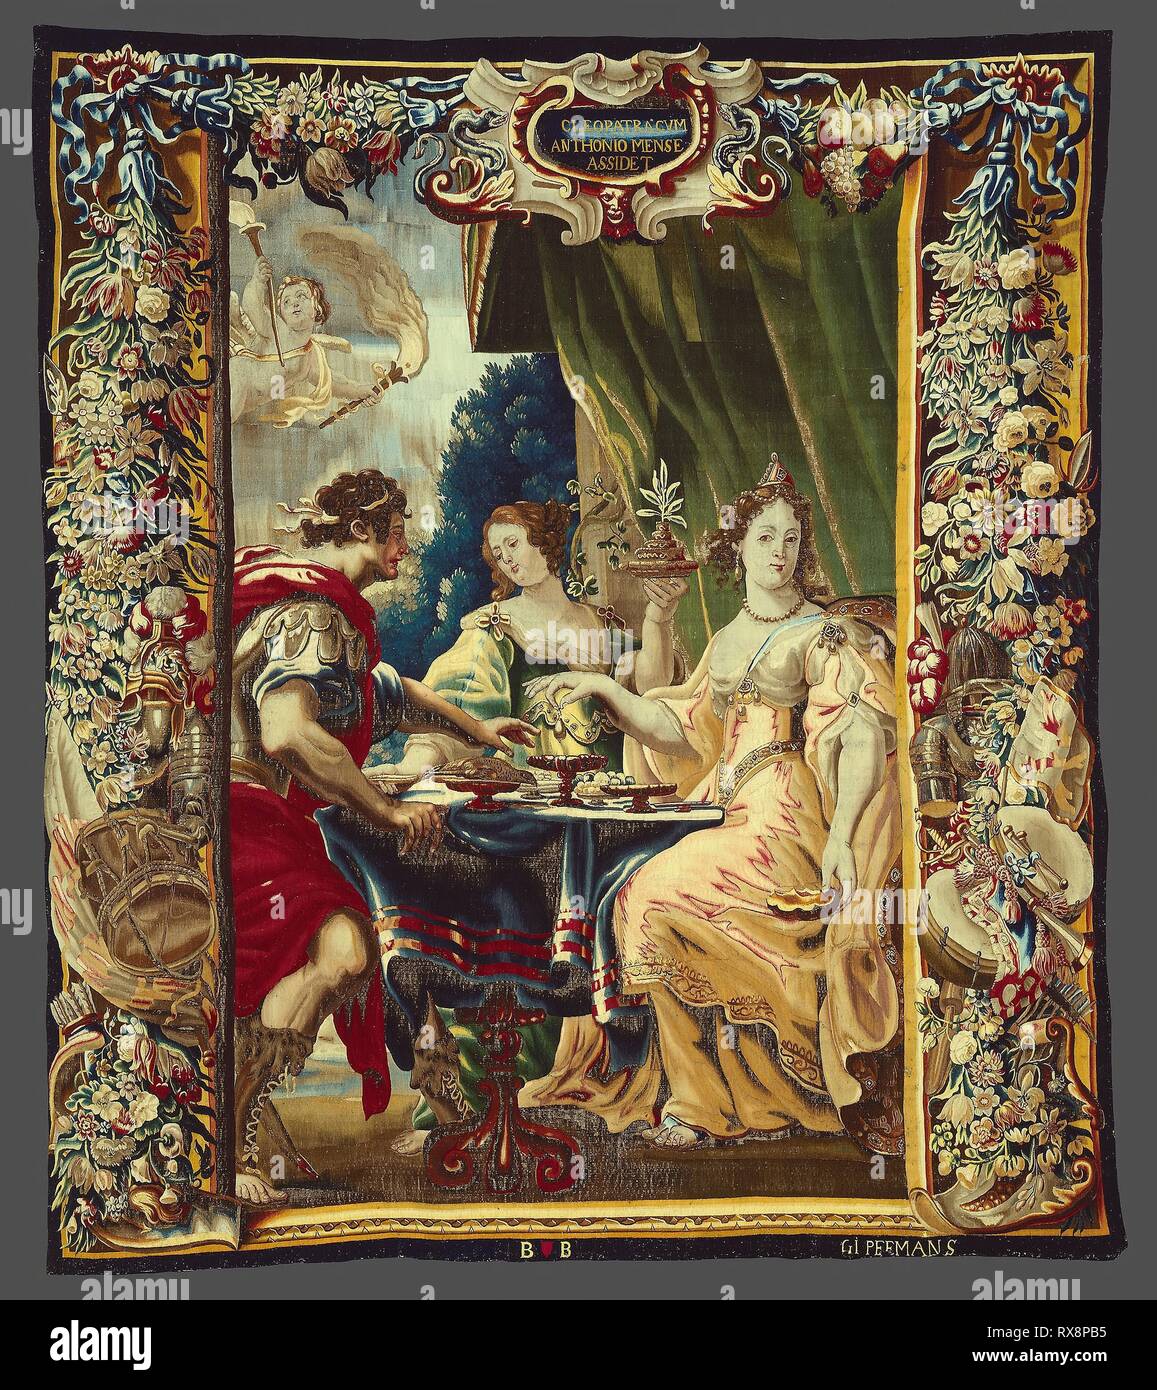 Cleopatra and Antony Enjoying Supper, from The Story of Caesar and Cleopatra. After a design by Justus van Egmont (1601-1674); Woven at the workshop of Gerard Peemans (1637/39-1725); Flanders, Brussels. Date: 1670-1690. Dimensions: 321.9 × 362.0 cm (126 3/4 × 142 5/8 in.). Wool and silk, slit and double interlocking tapestry weave. Origin: Brussels. Museum: The Chicago Art Institute. Author: Geraert Peemans. Stock Photo